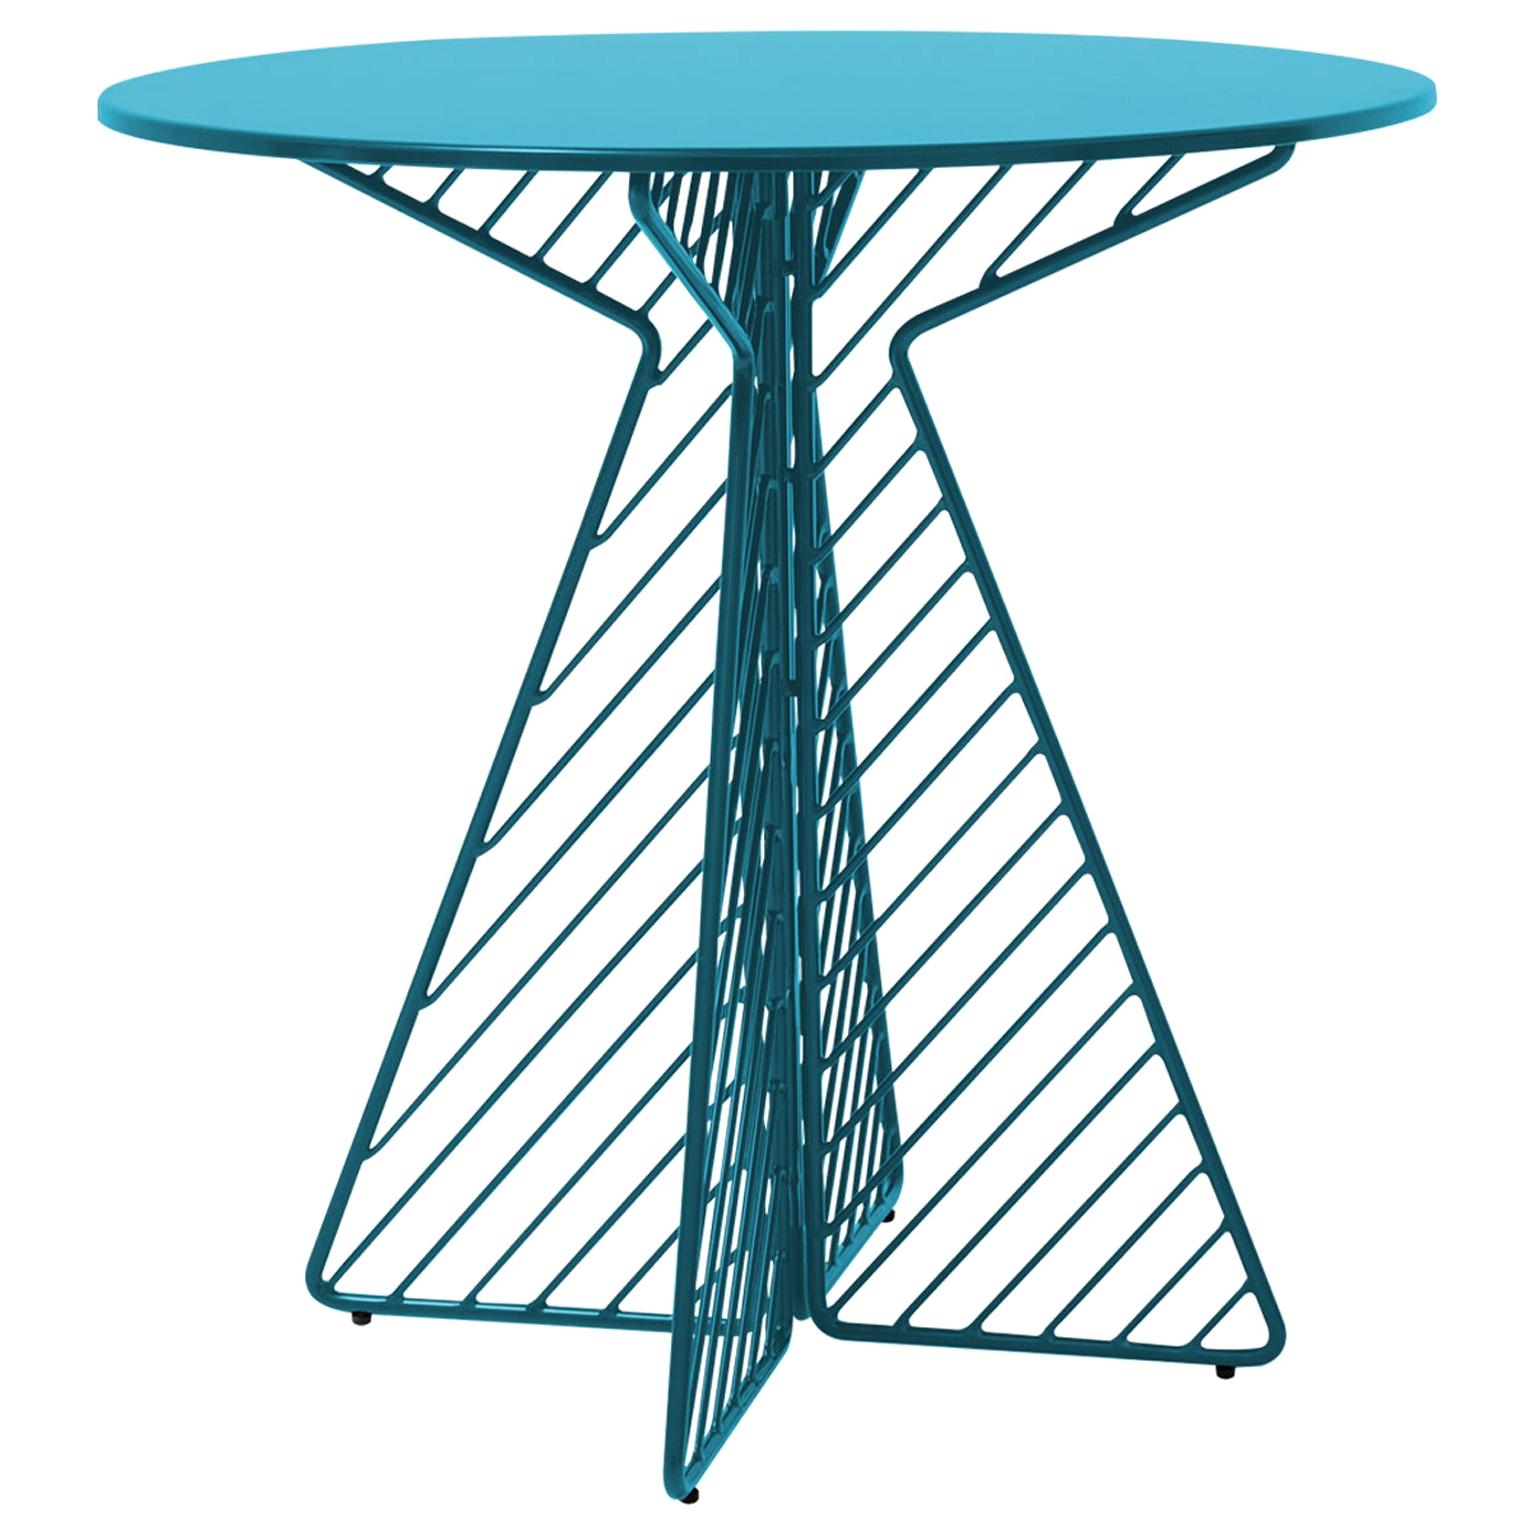 Cafe Table, Metal Wire Flat Pack Dining Table by Bend Goods in Peacock Blue